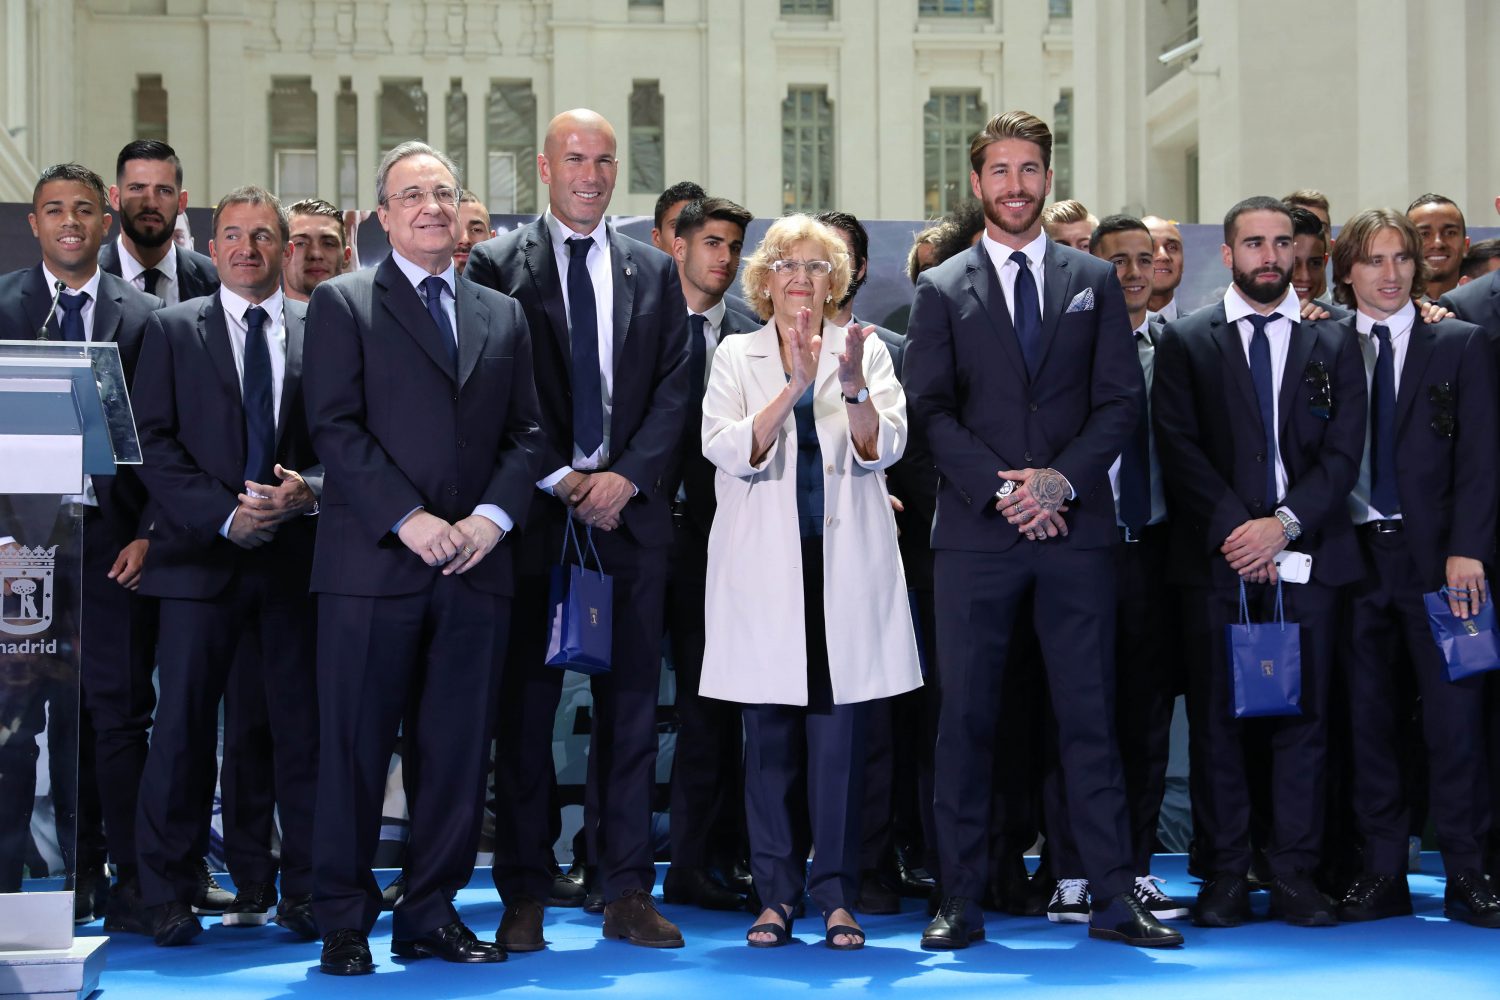 Shocking: Florentino Perez Disrespects Real Madrid Legends In Leaked Call